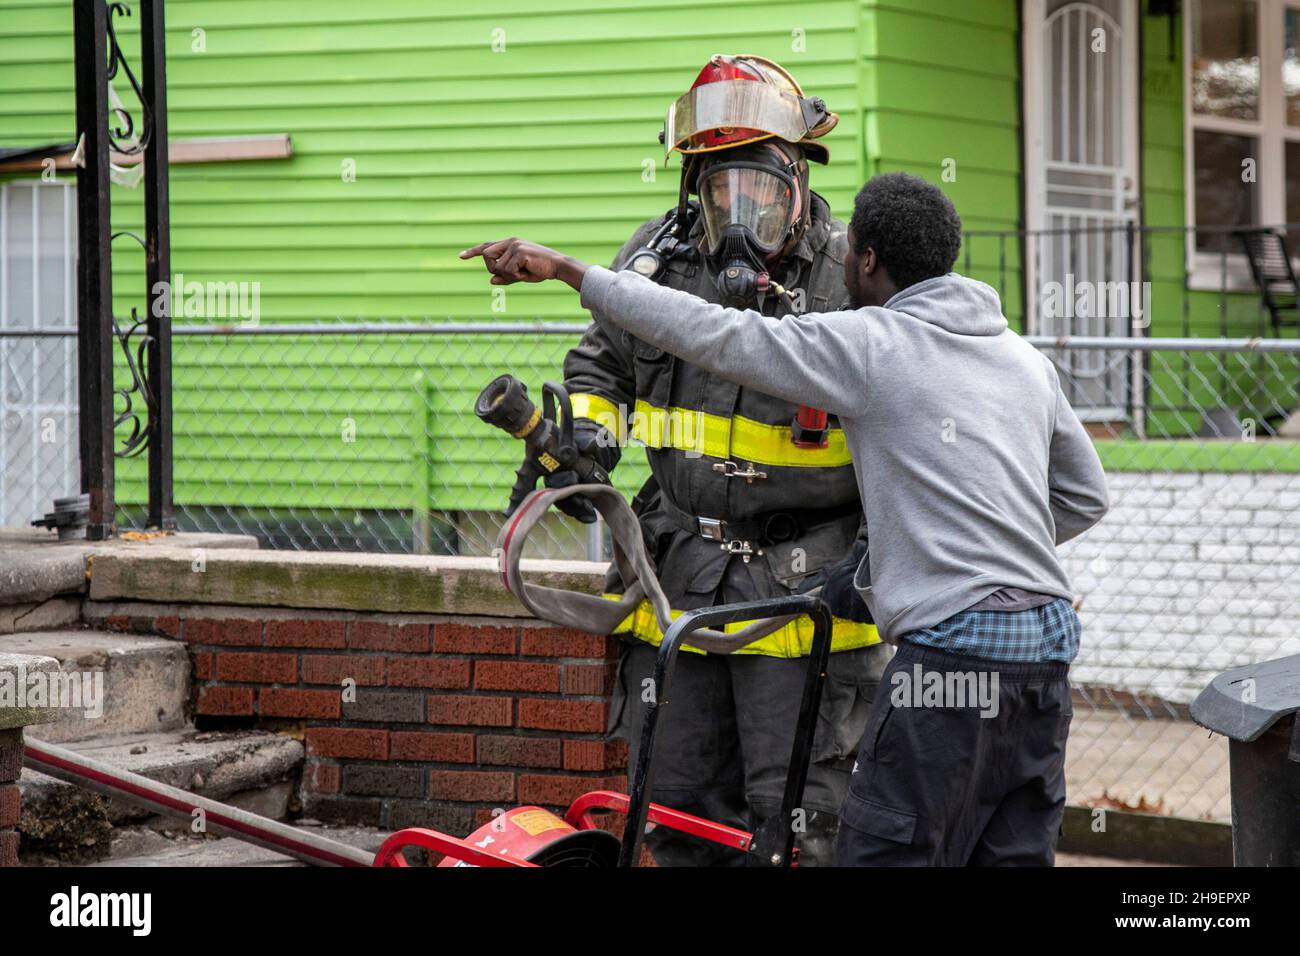 Detroit, Michigan - A resident of a burning house points into the building as he talks to a firefighter arriving at the scene. The fire damaged a home Stock Photo